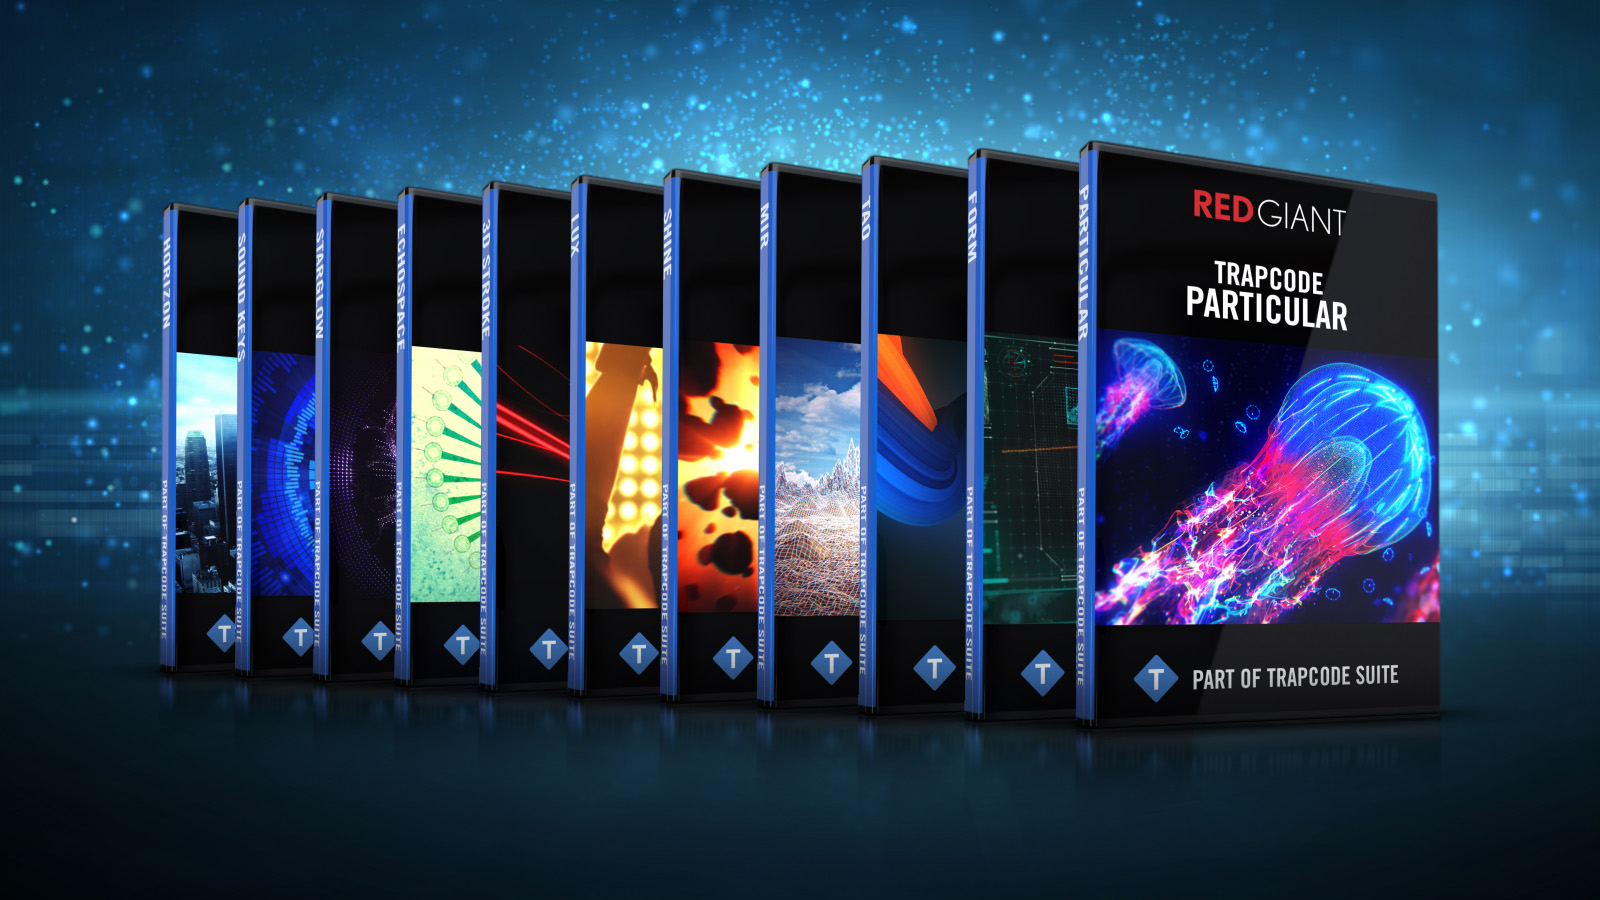 Download red giant trapcode particular 4.1.1 for adobe mac download